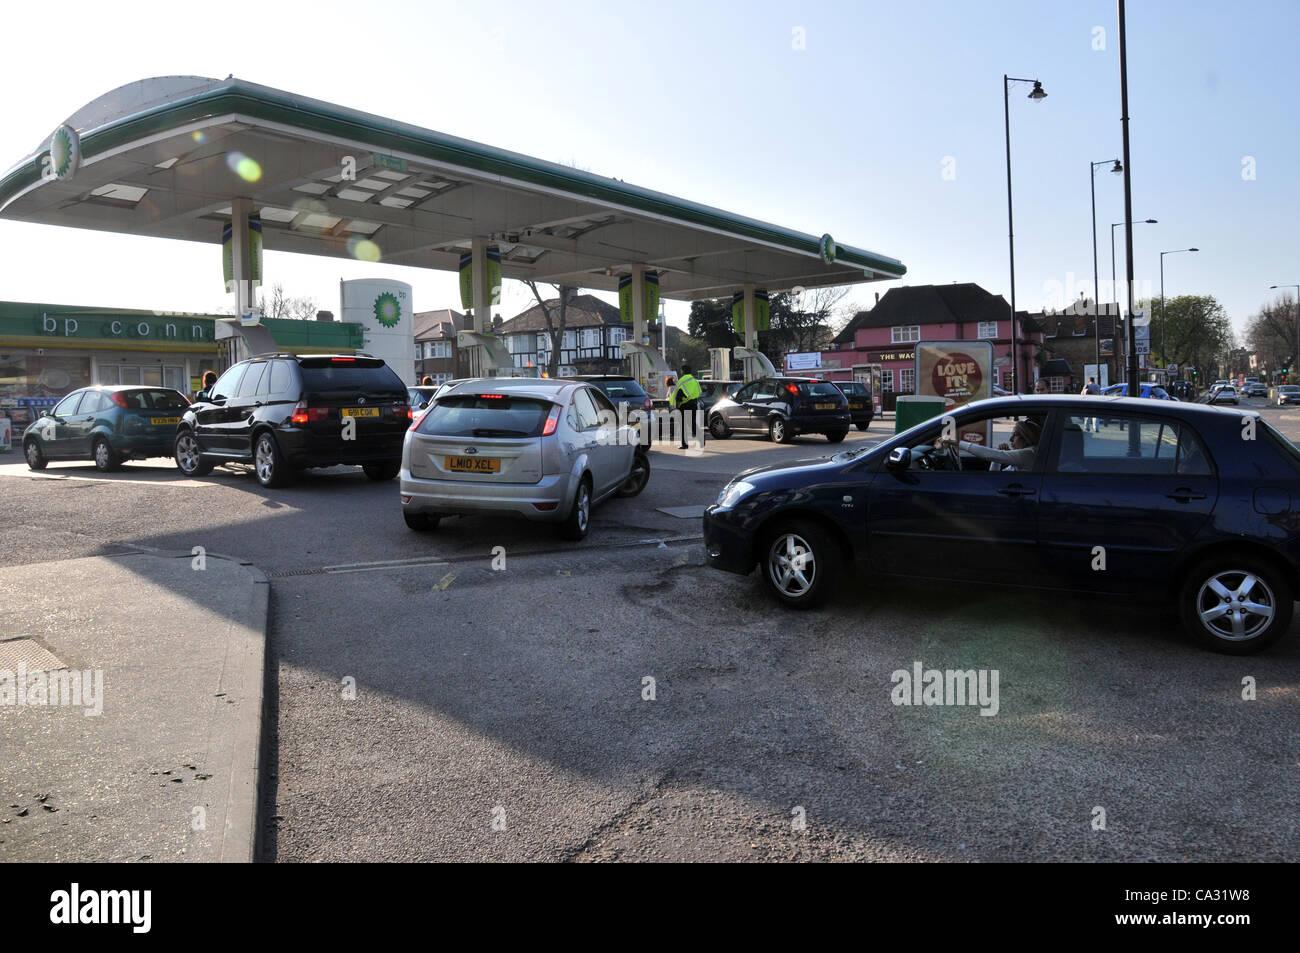 Queue at a BP station in Southgate, North London, UK, on 29 Mar, 2012 as the threat of a strike by tanker drivers looms. Petrol and diesel now over £1.41 a litre. Credit: Matthew Chattle/Alamy Live News Stock Photo